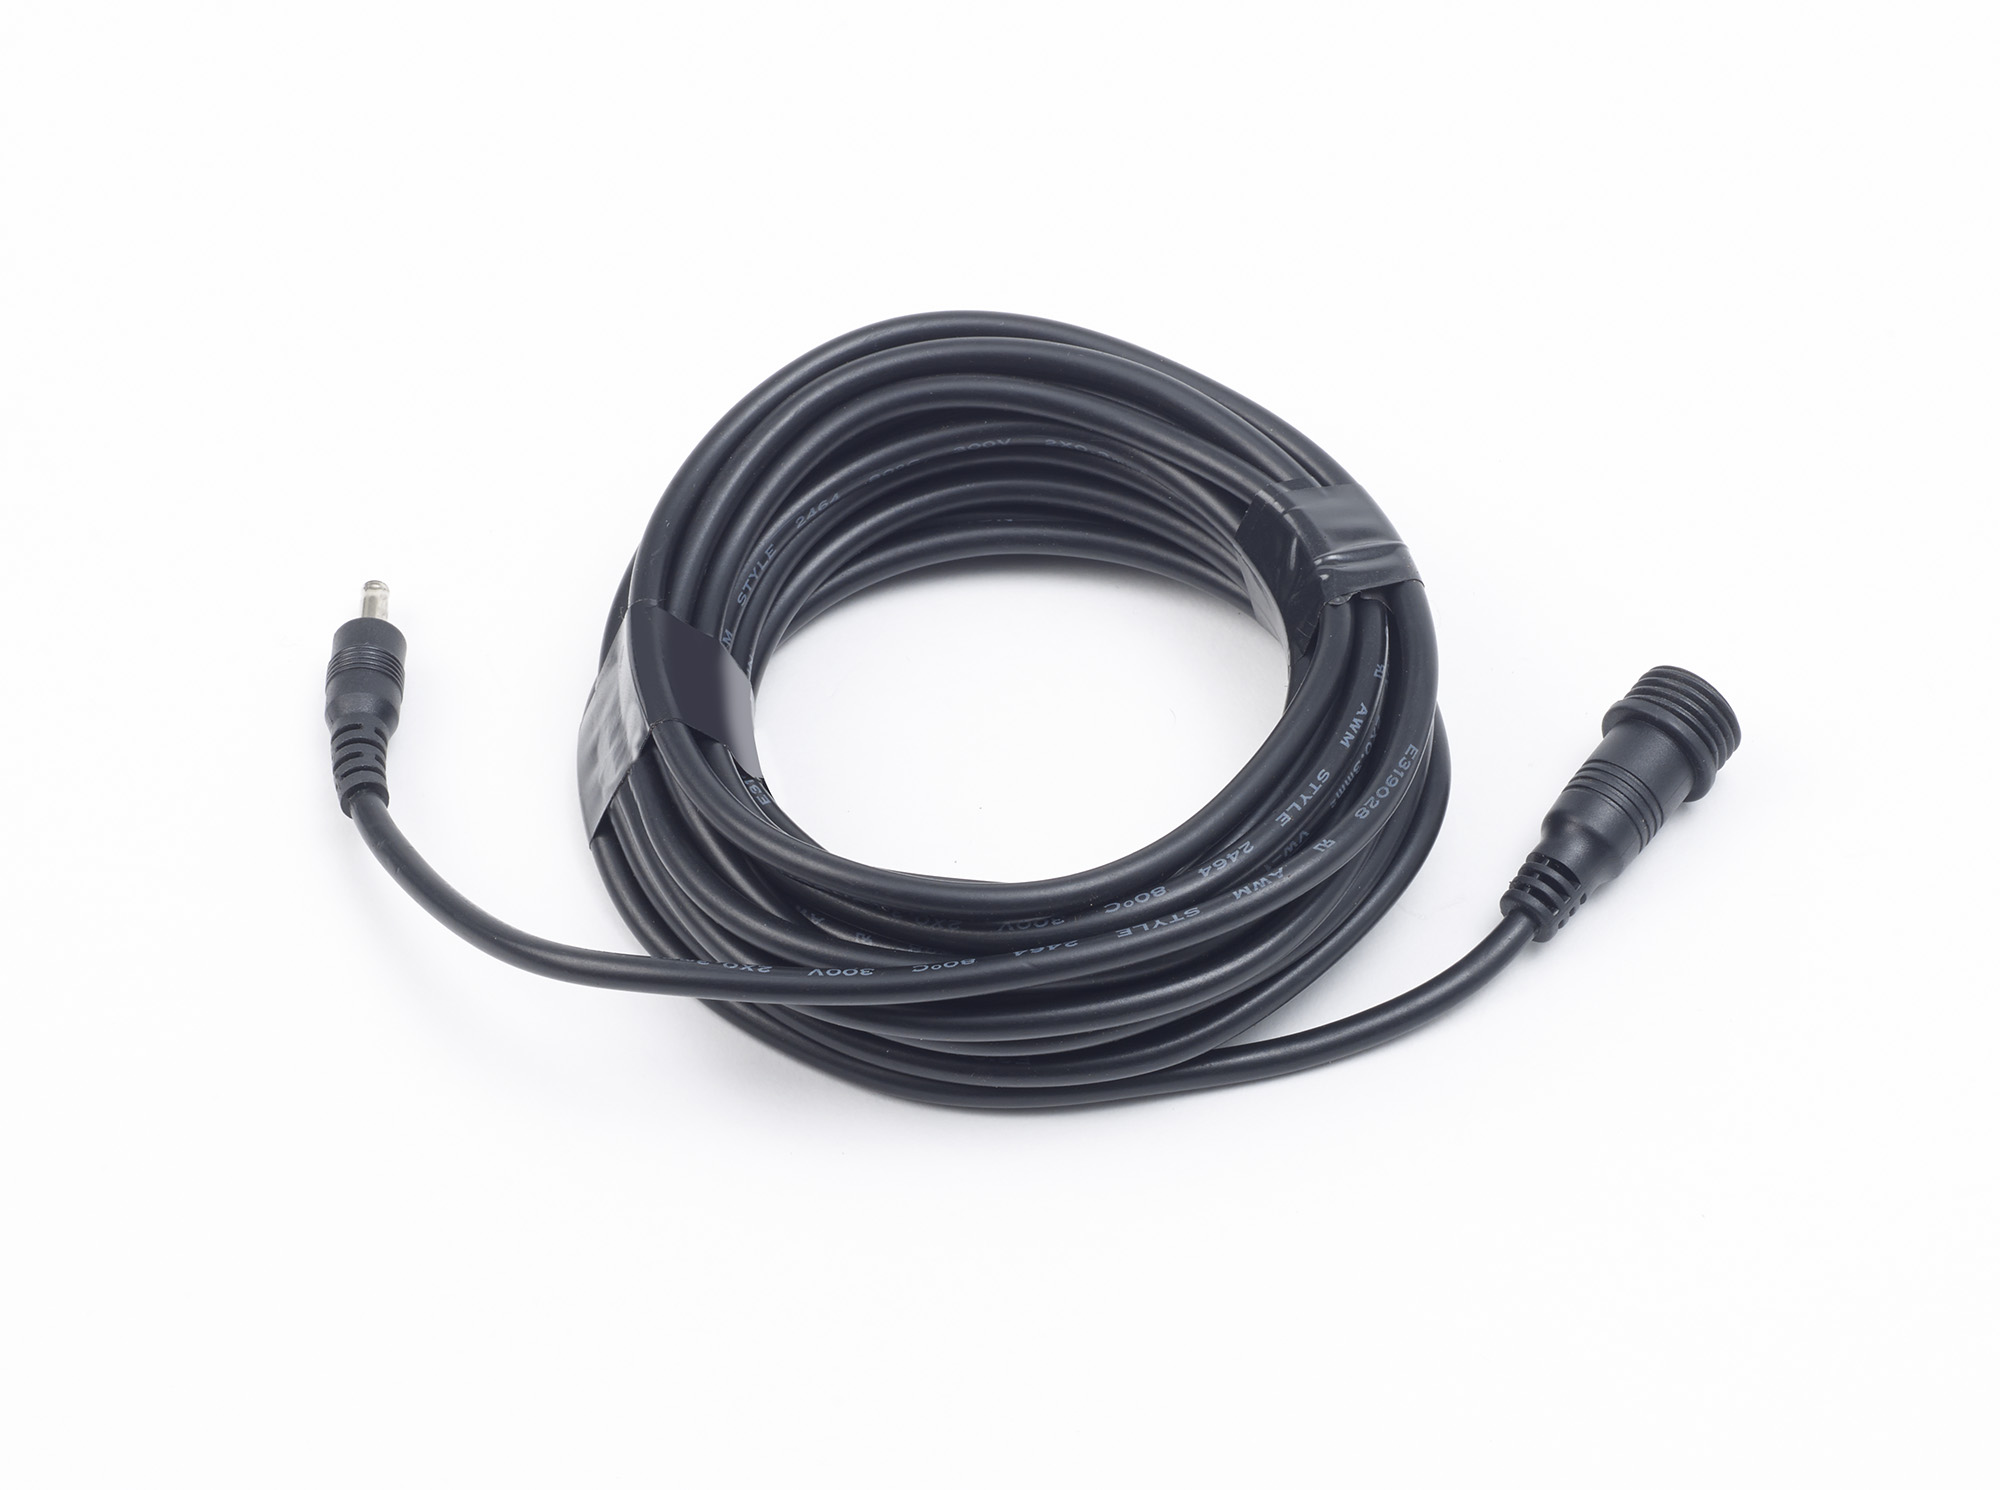 Hubi 5m Cable - from Hub to Lights